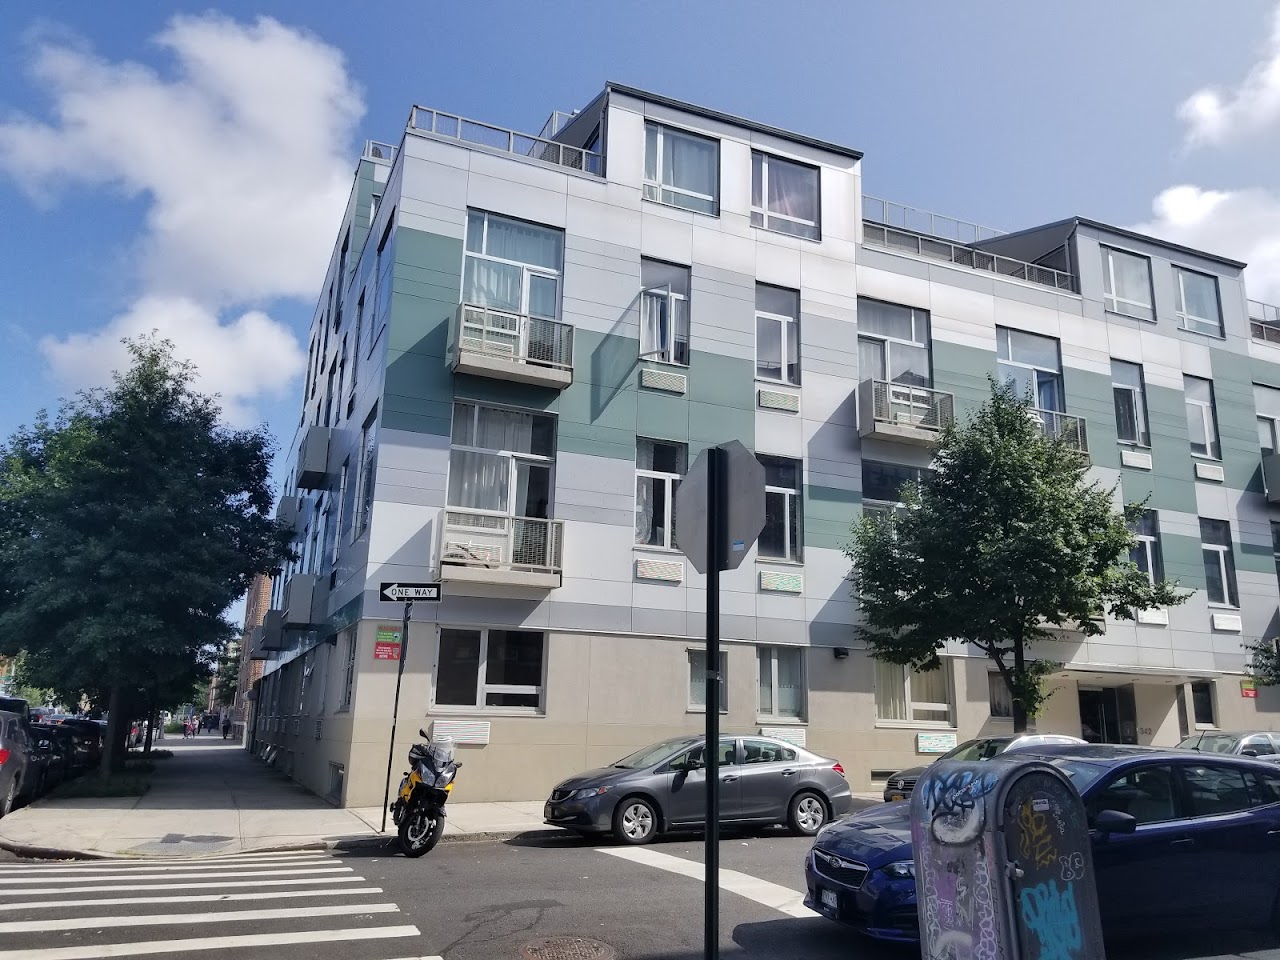 Photo of KNICKERBOCKER AVENUE CLUSTER. Affordable housing located at 194 ELDERT ST BROOKLYN, NY 11207